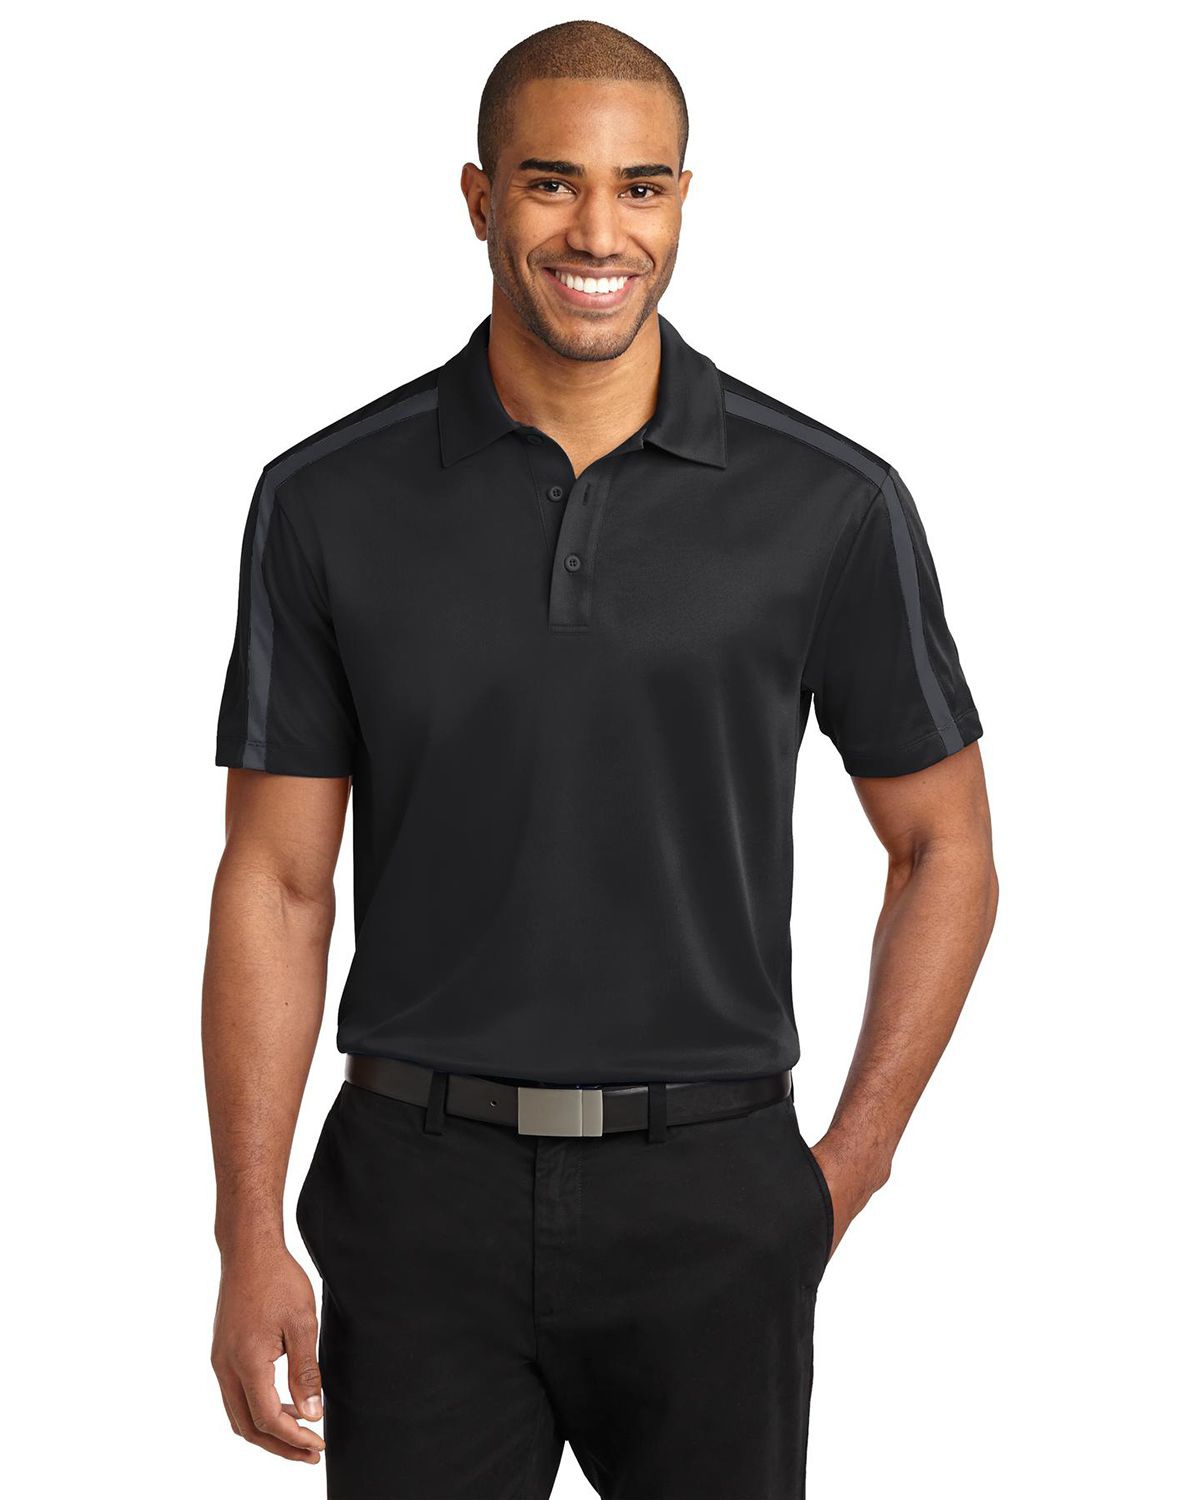 'Port Authority K547 Silk Touch Performance Colorblock Stripe Polo'